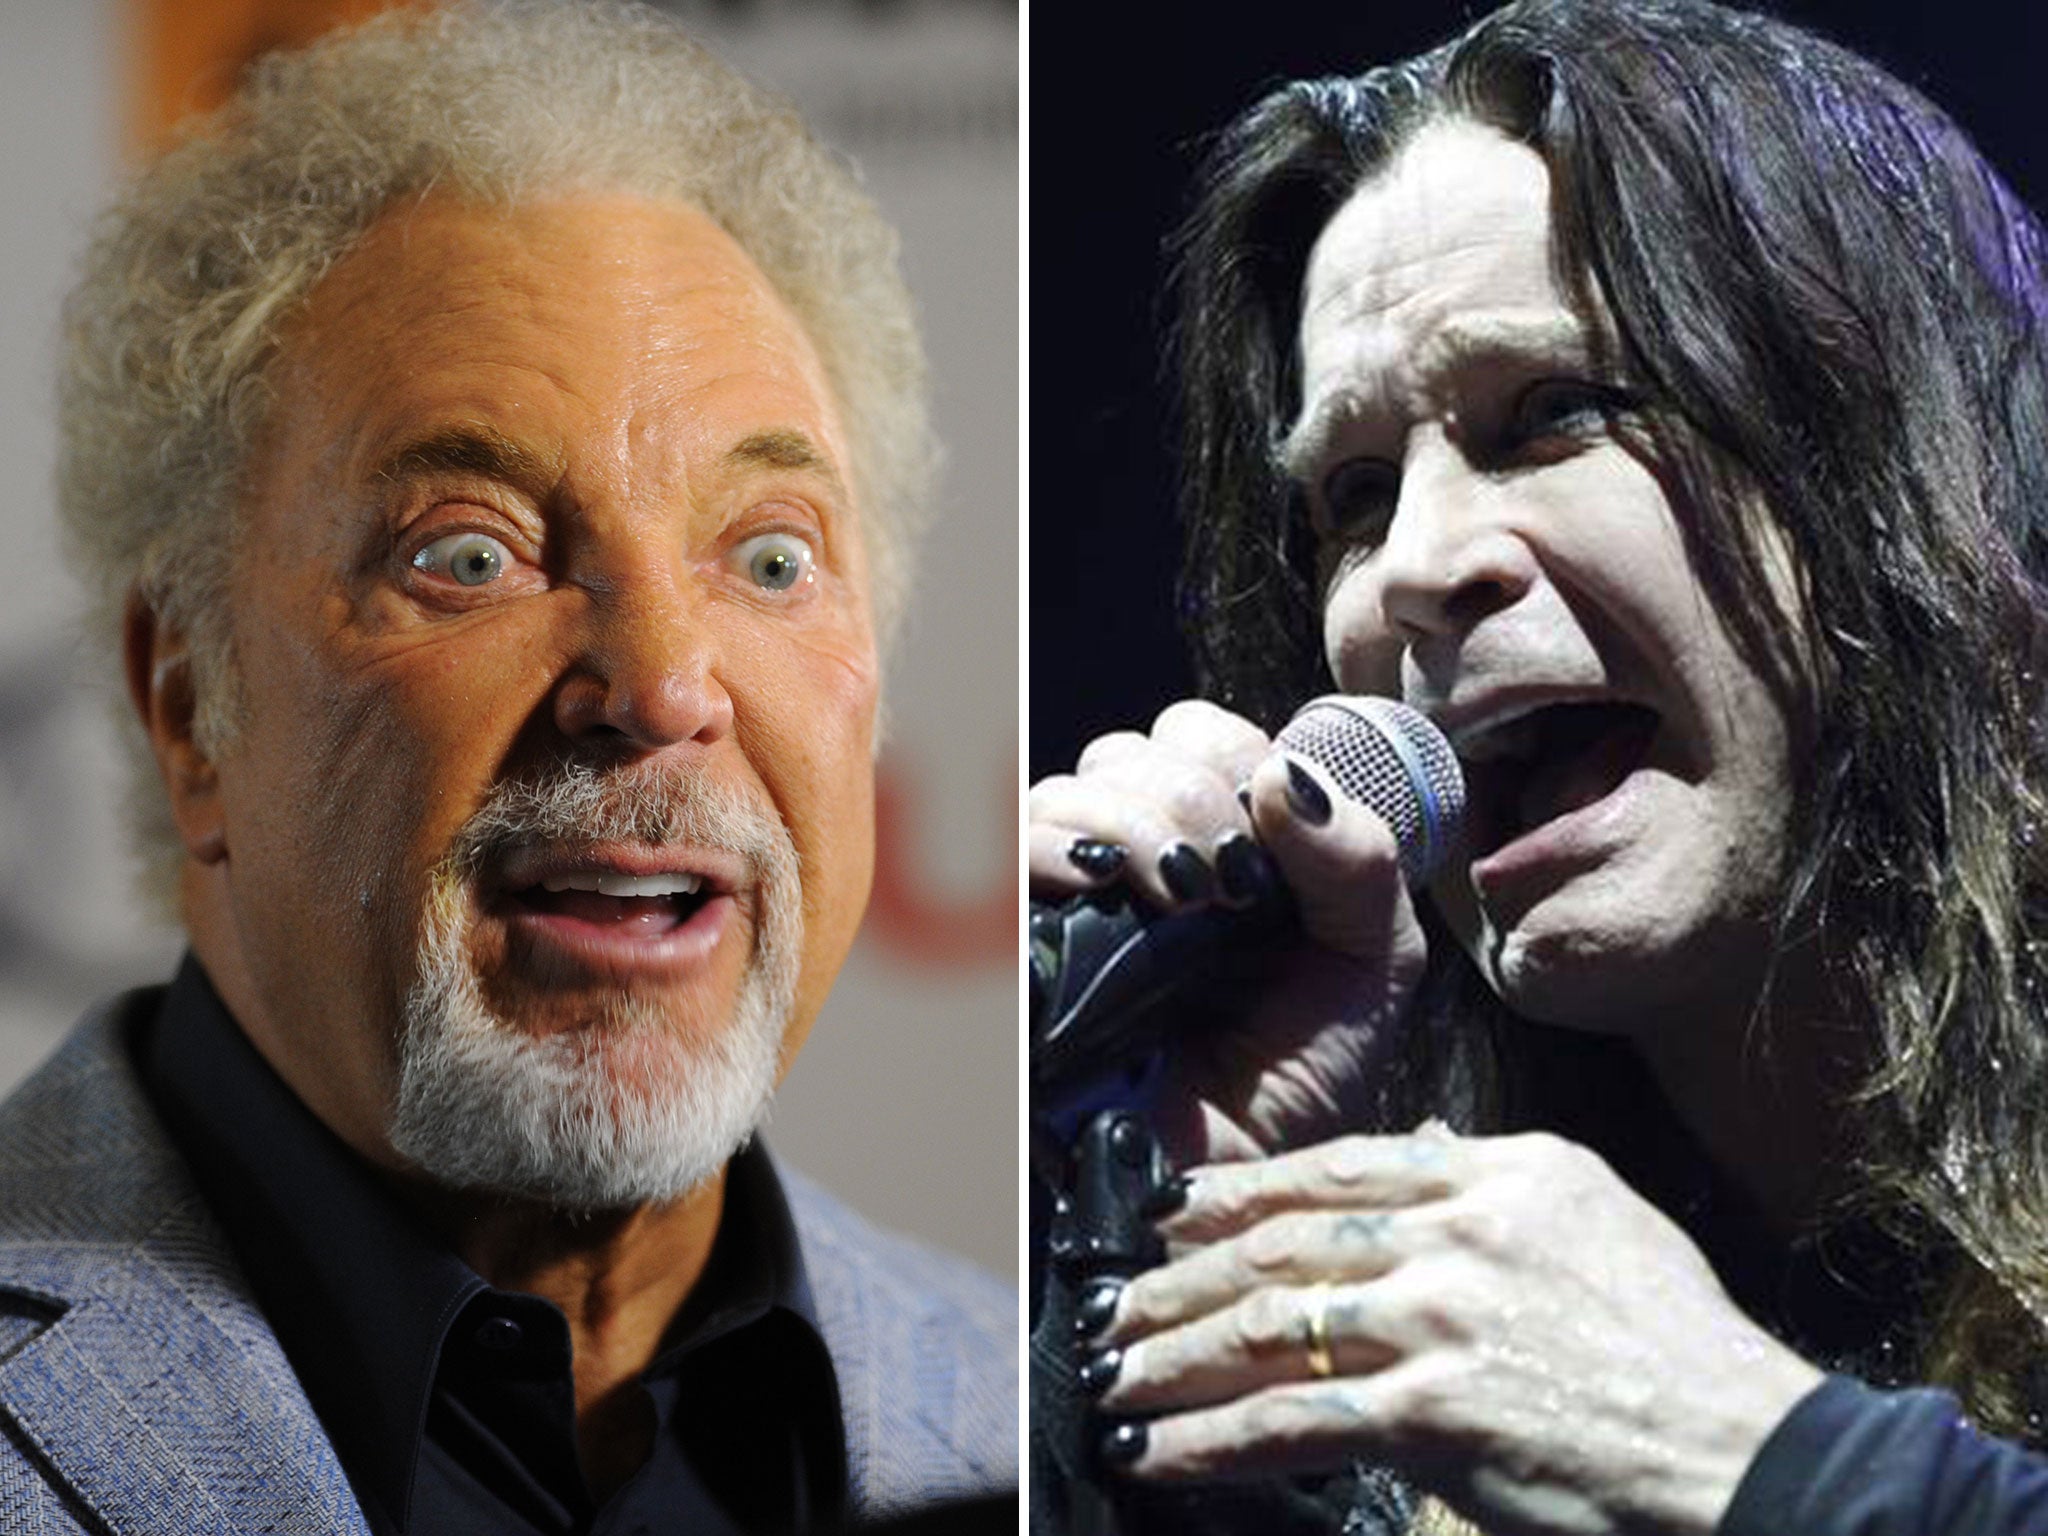 Not many people would put Tom Jones and Ozzy Osbourne together